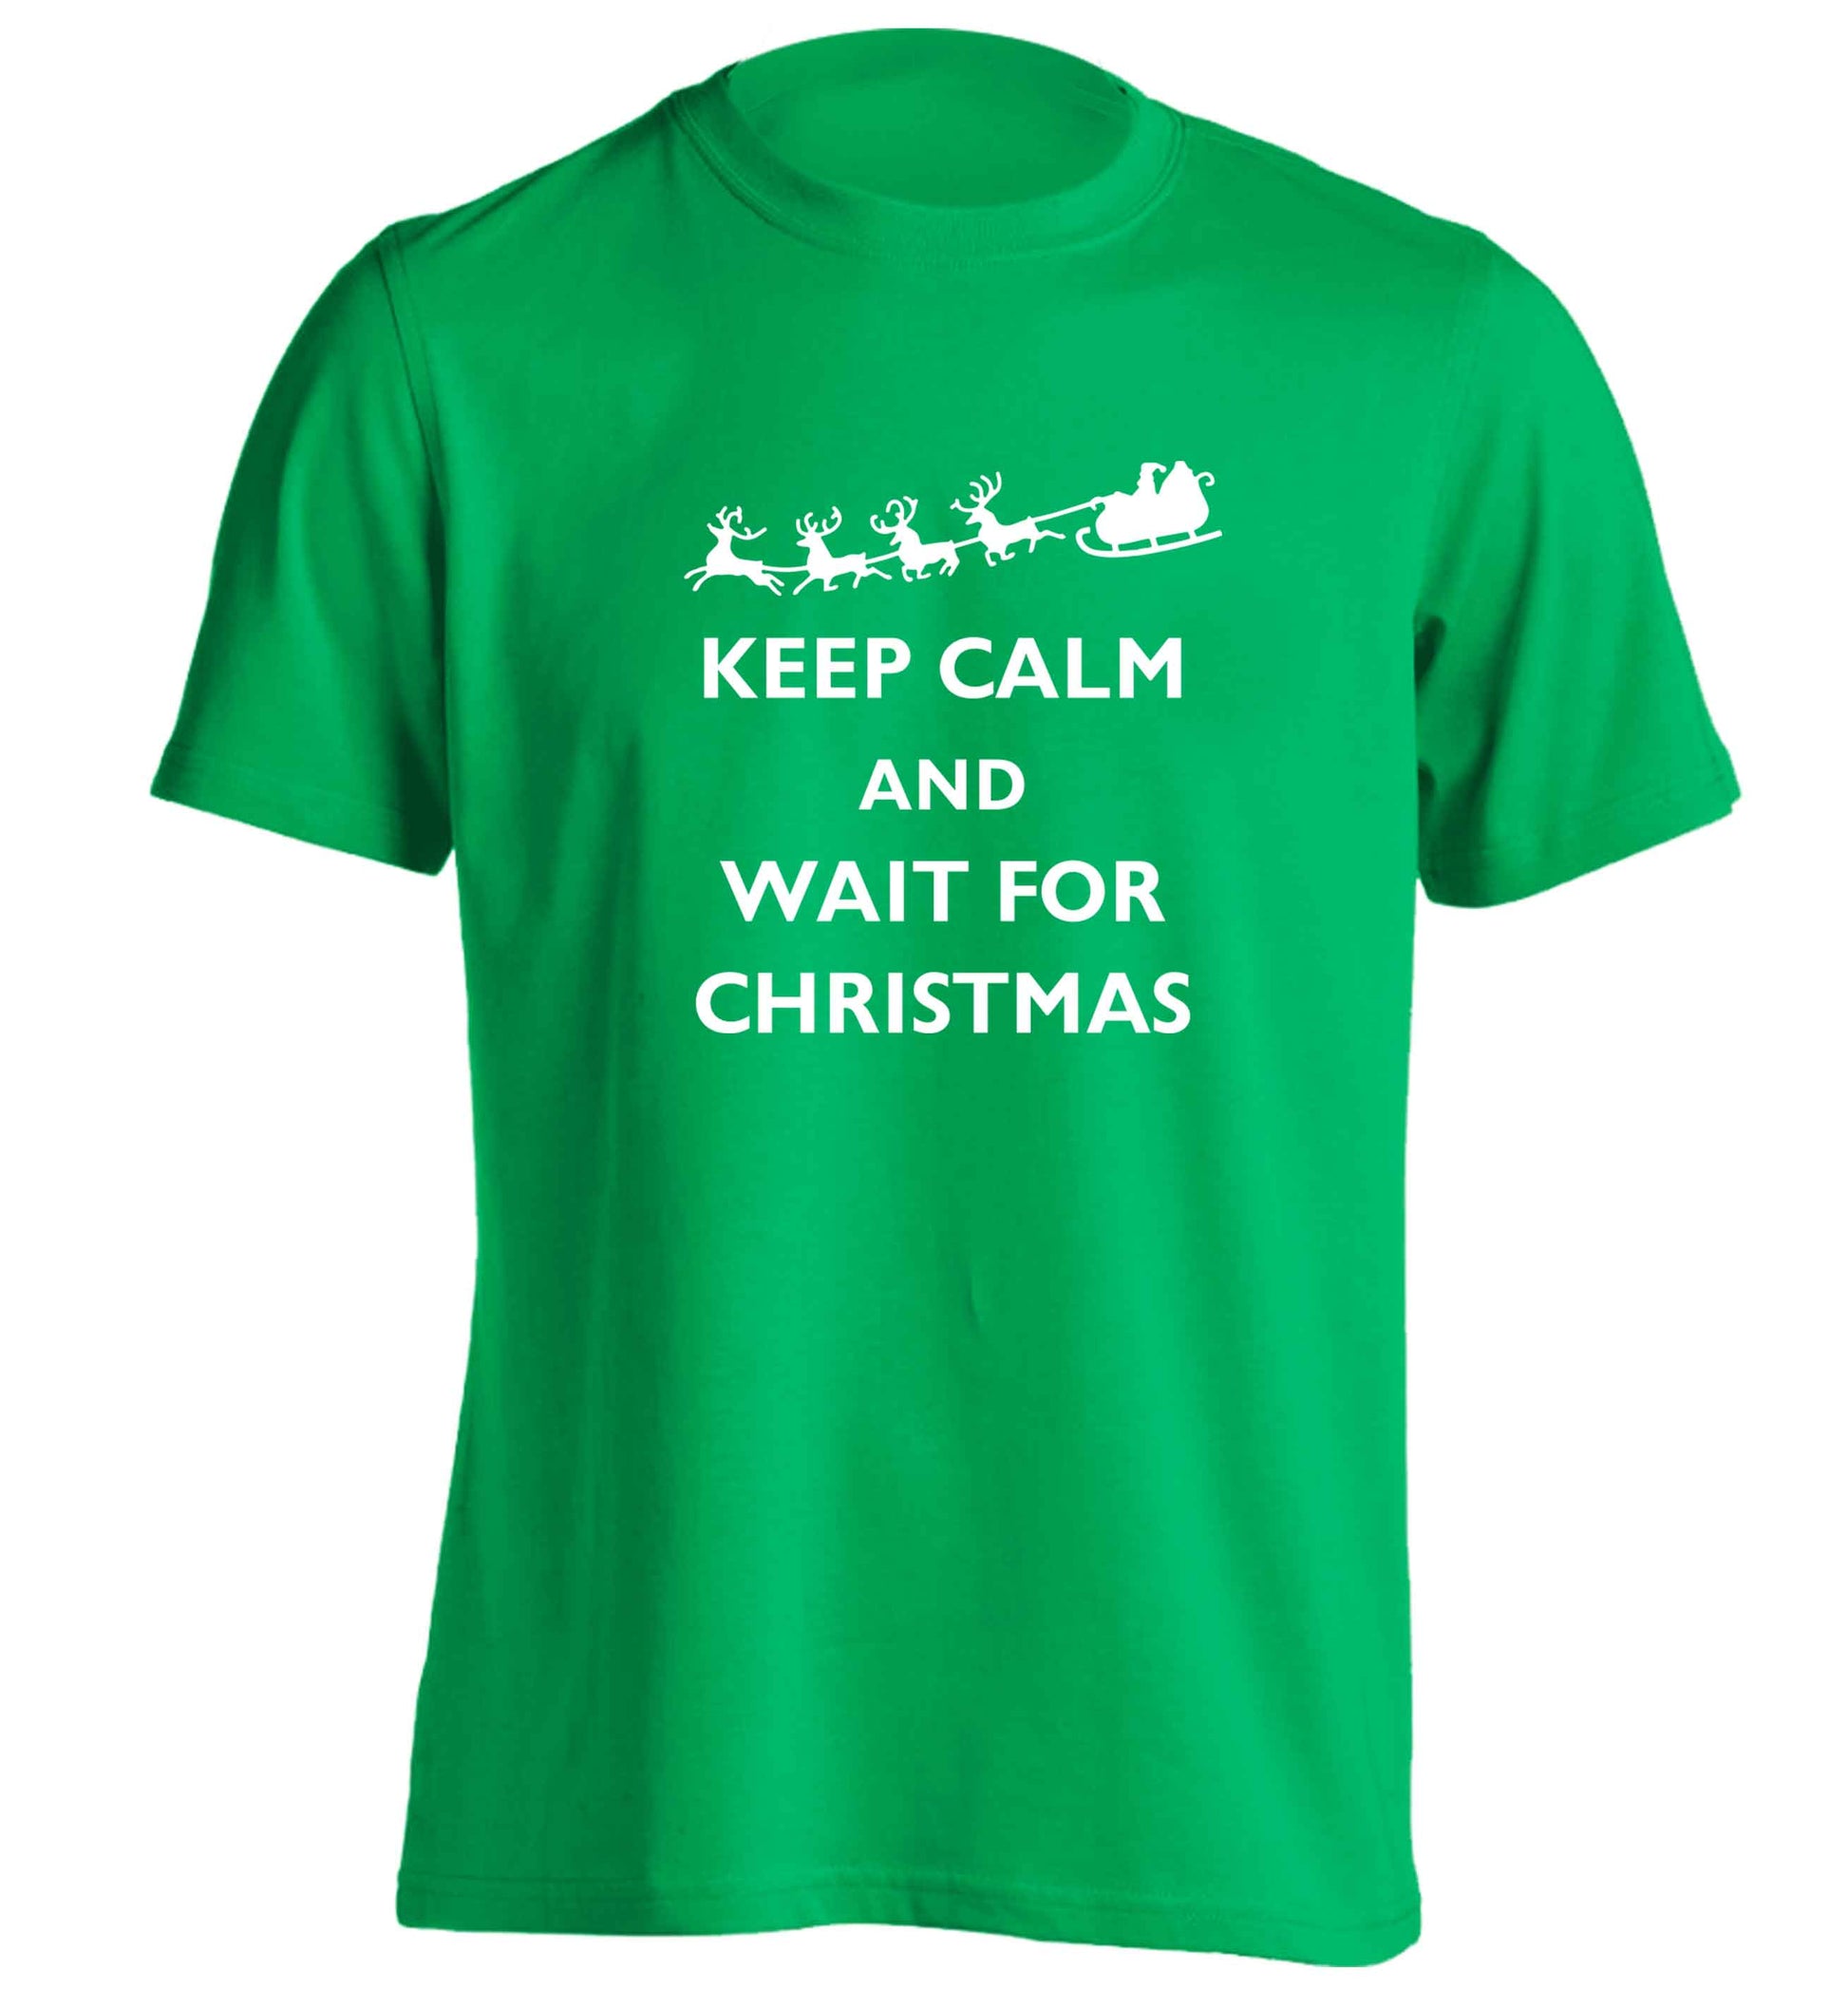 Keep calm and wait for Christmas adults unisex green Tshirt 2XL